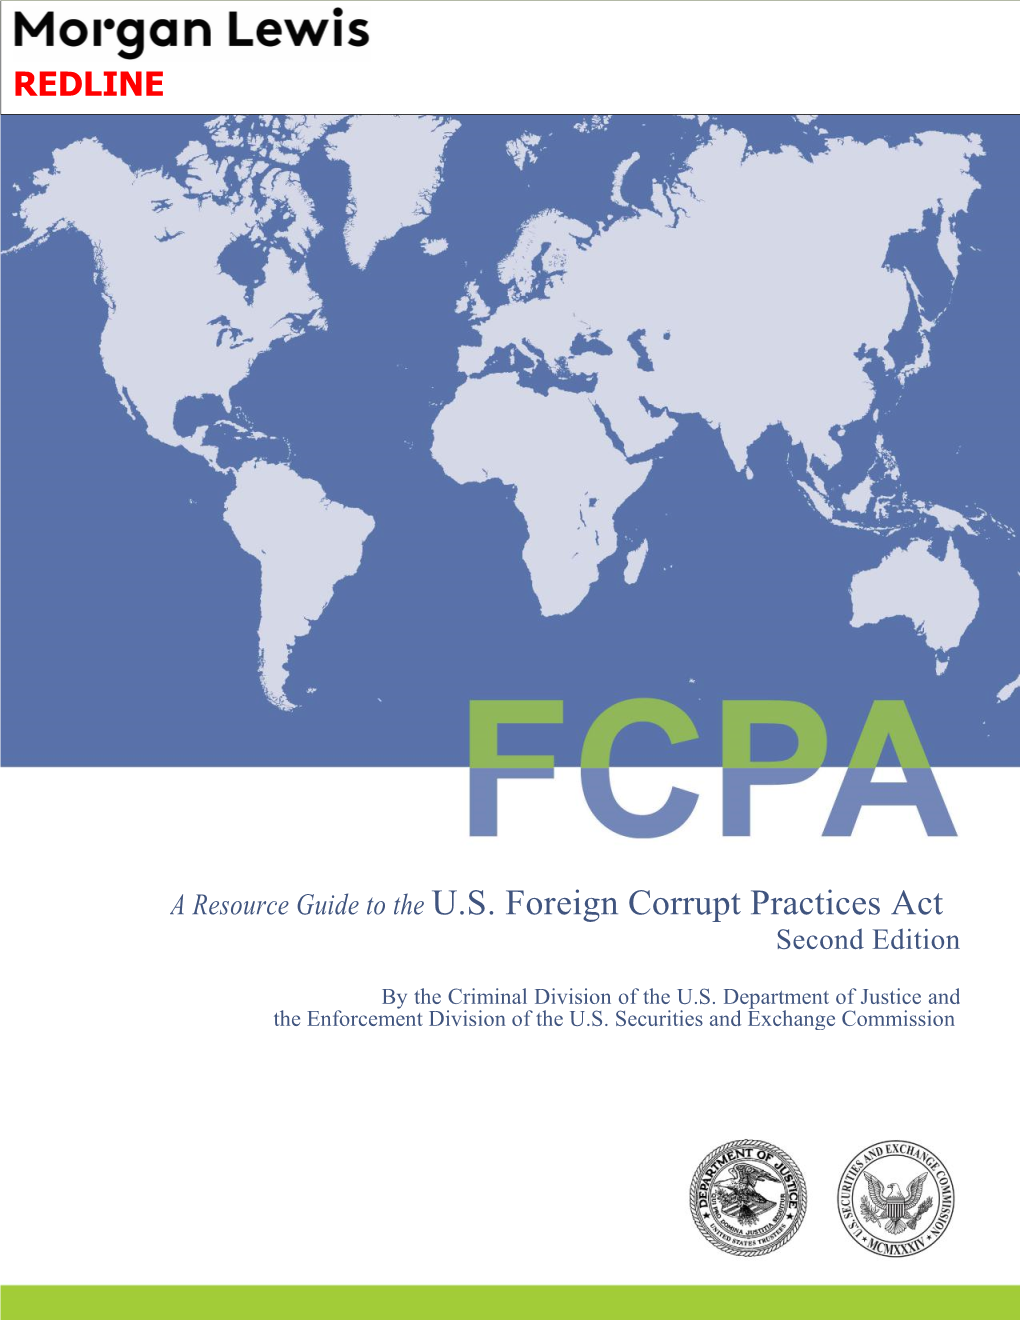 A Resource Guide to the U.S. Foreign Corrupt Practices Act Second Edition